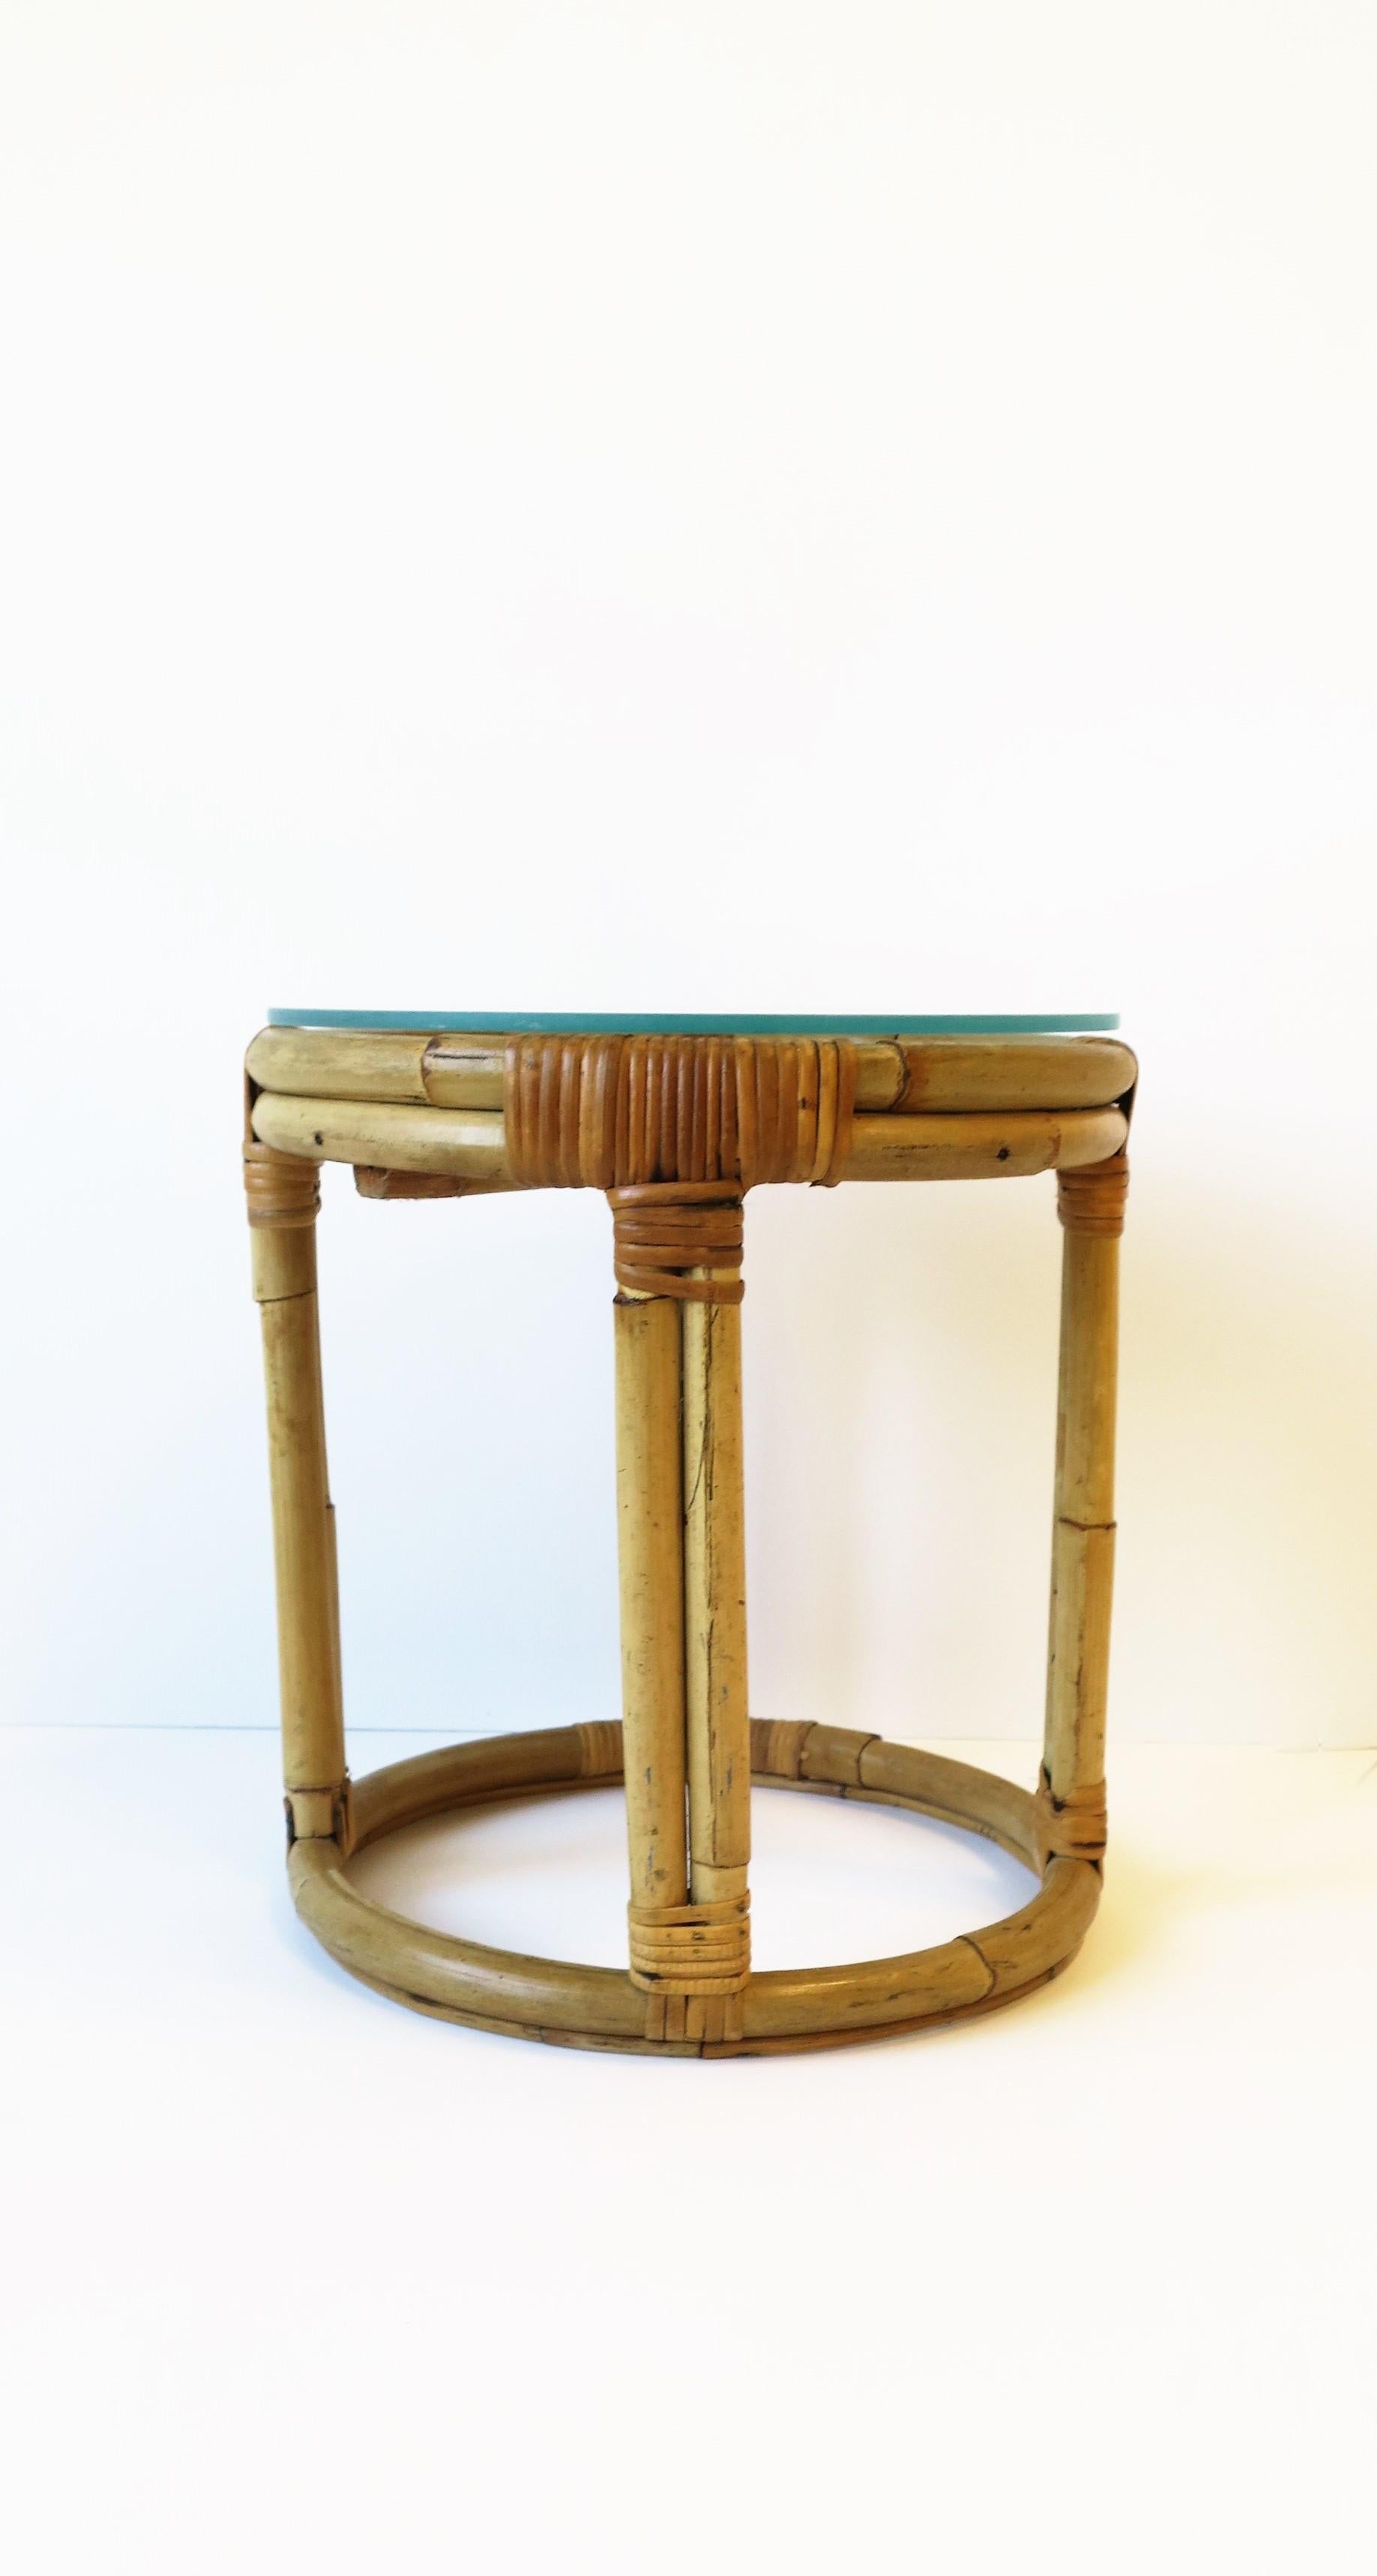 A small round wicker rattan side or drinks table with glass top, circa mid-20th century. Easy to move around and a convenient size. Other uses may include a plant stand, etc. Dimensions: 12